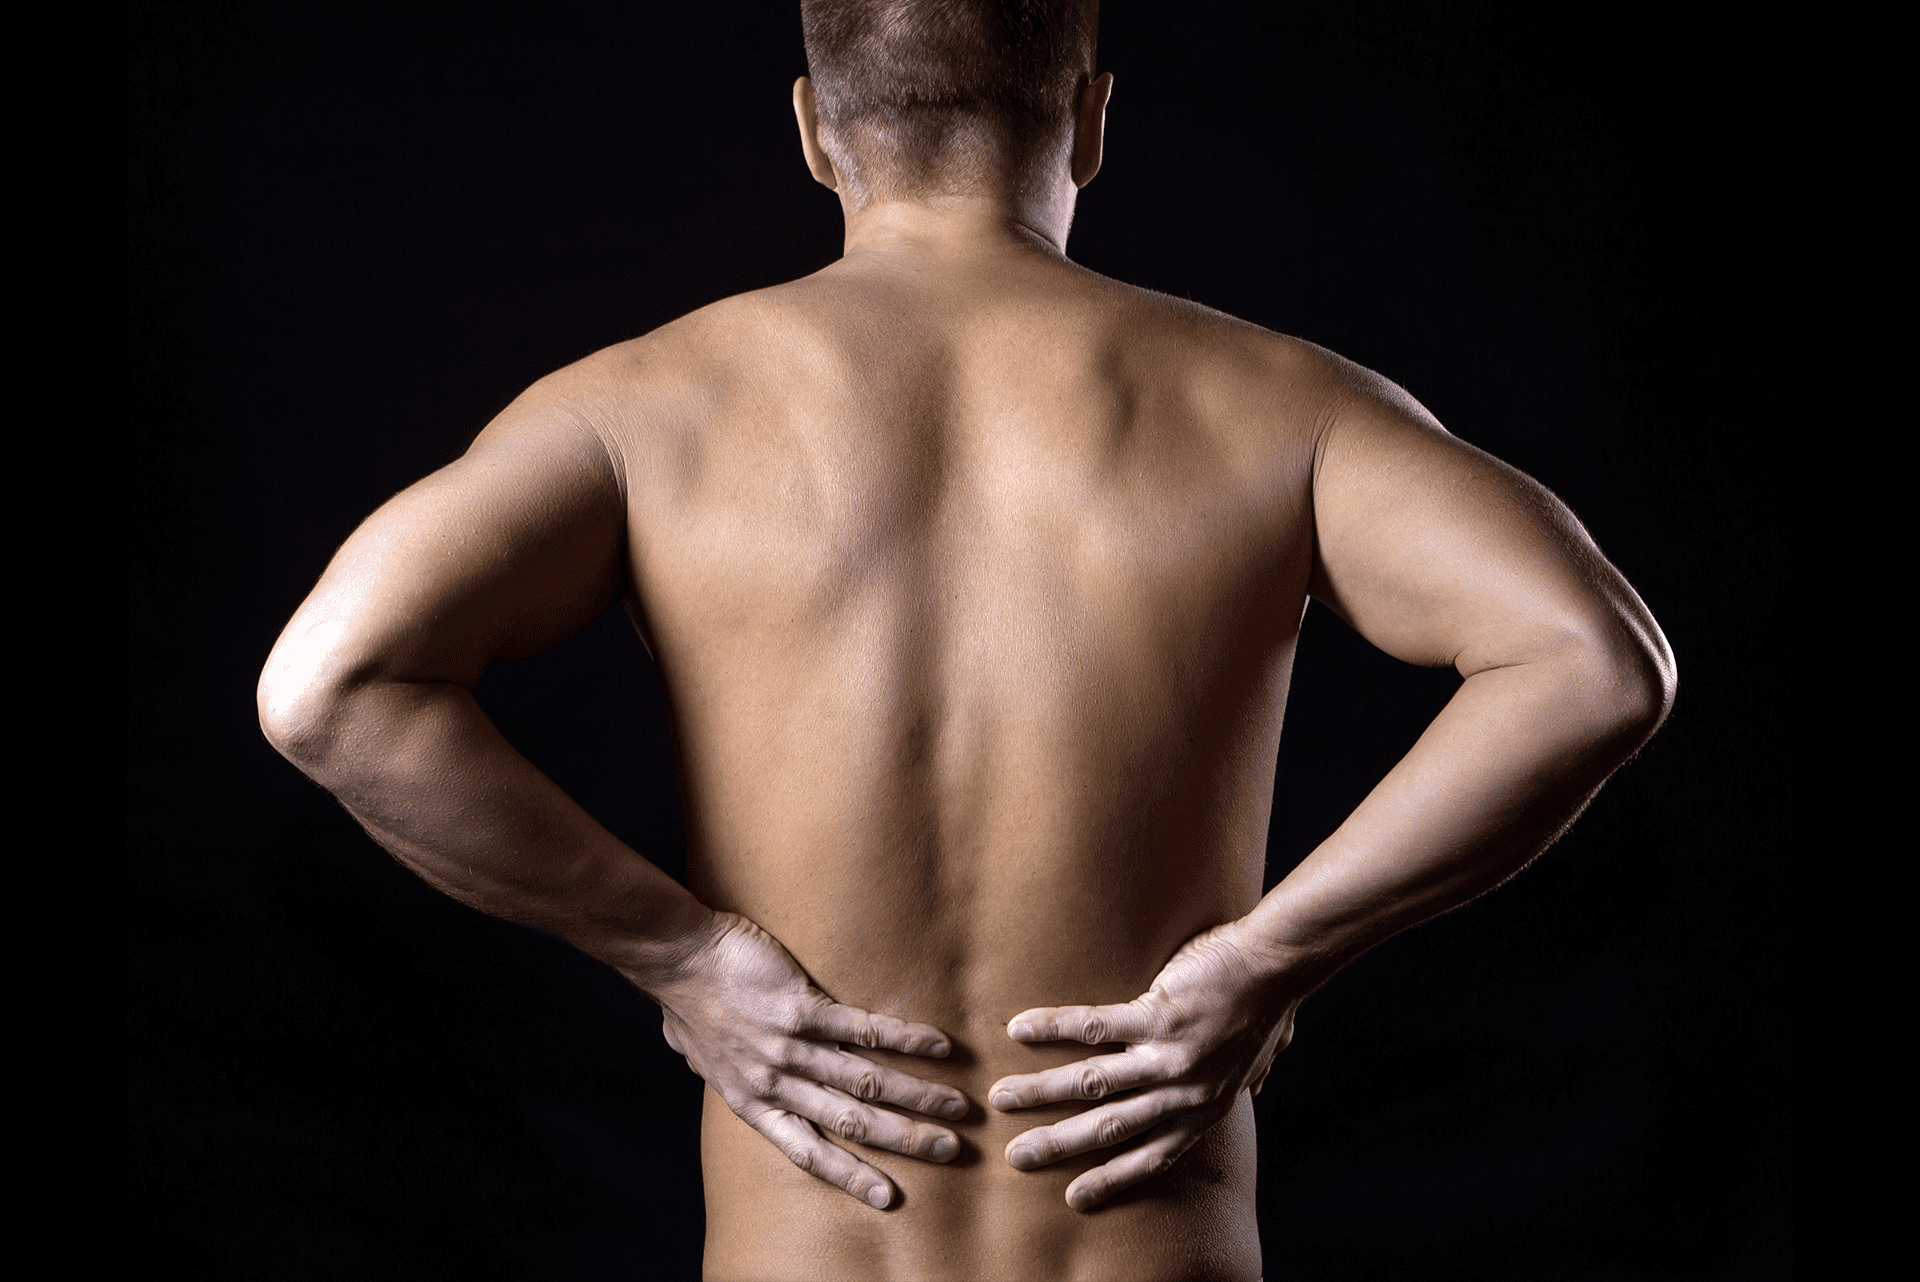 Stem Cell Therapy for Back Pain | Renew Medical Centers